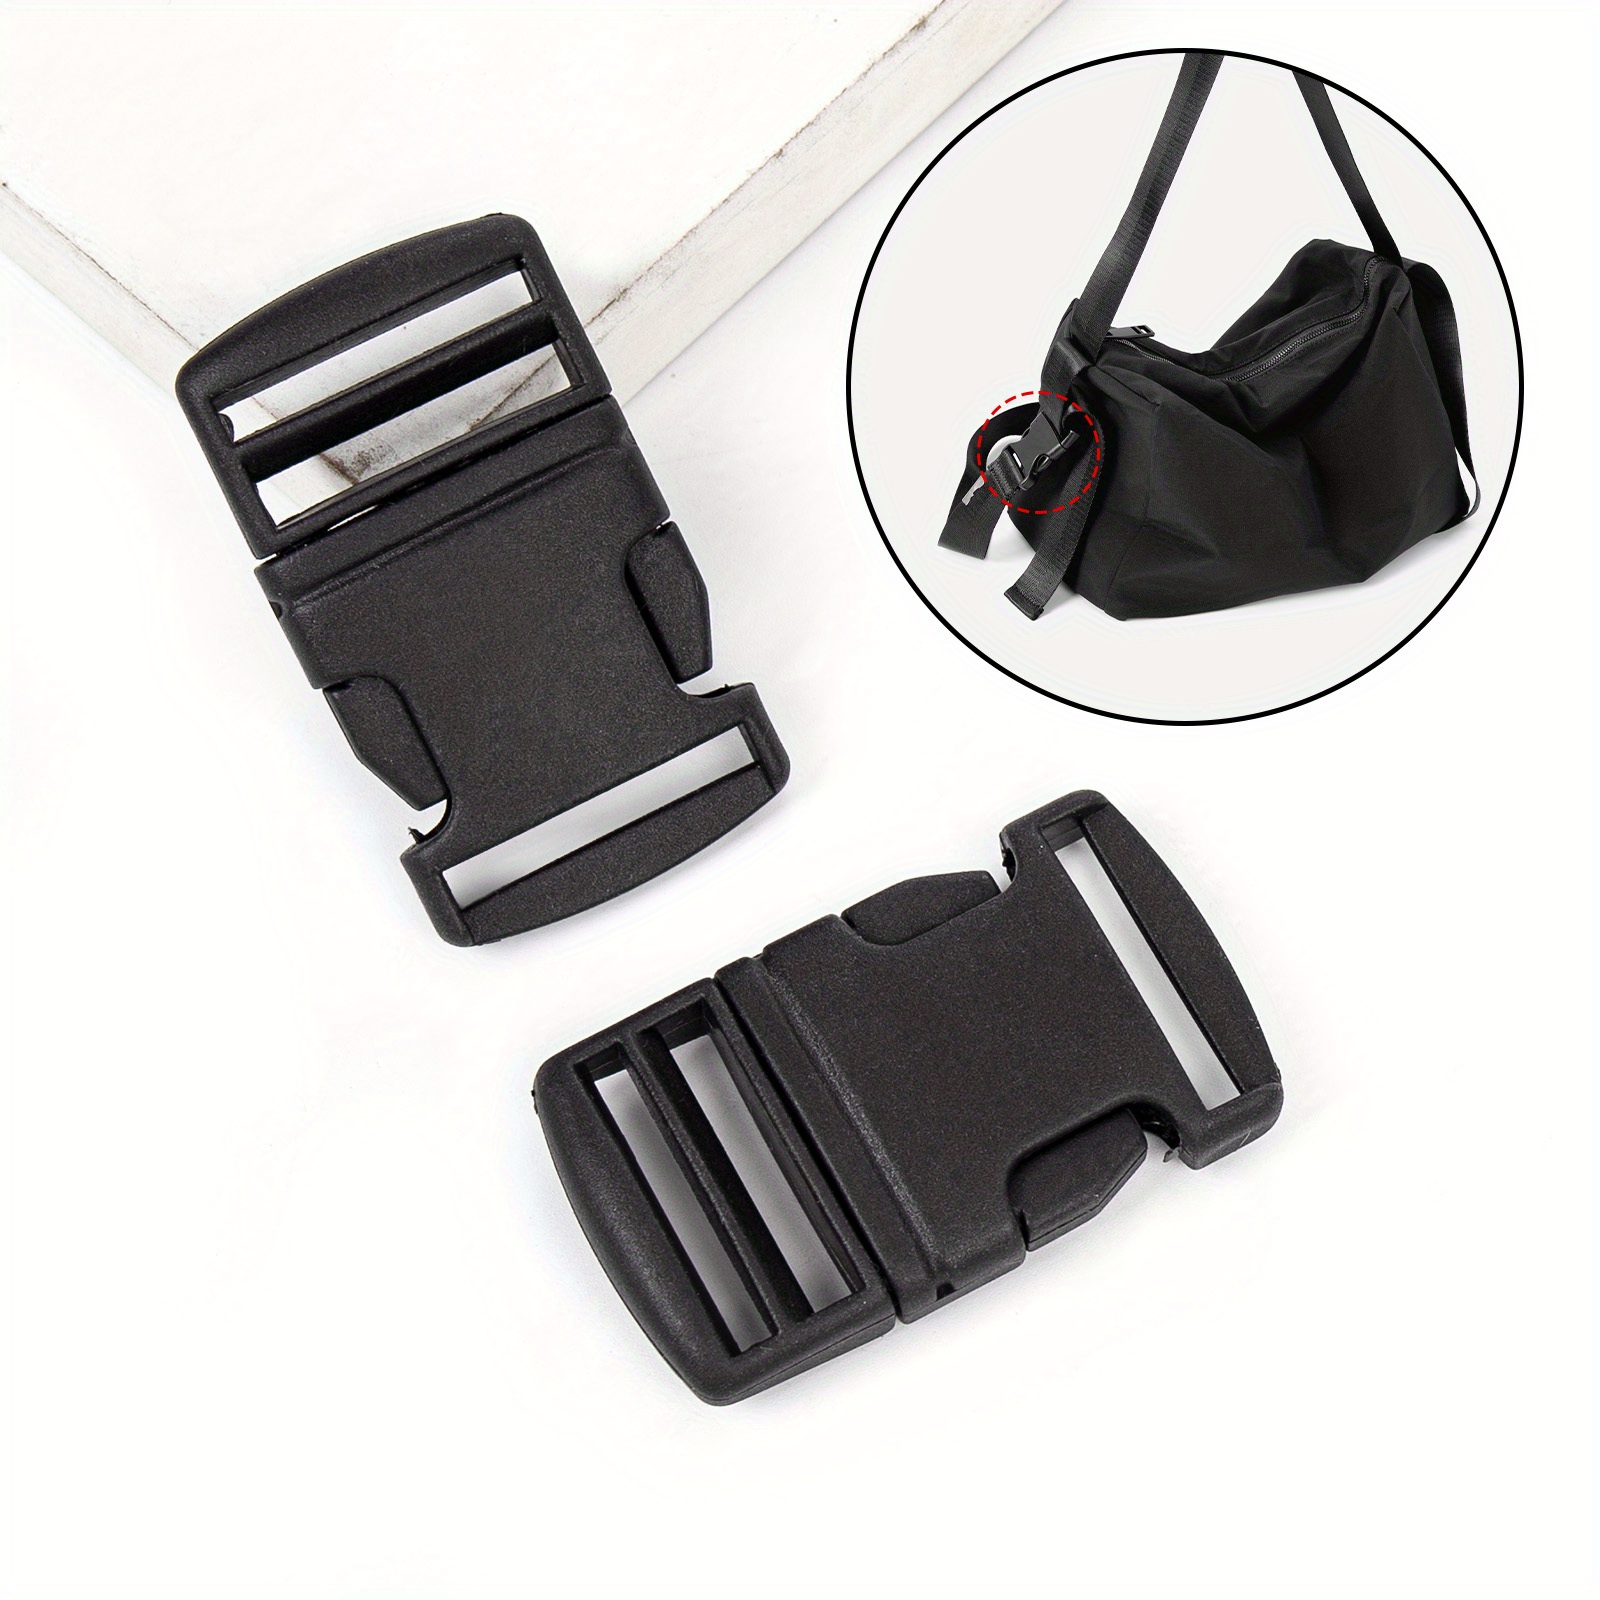 10Pcs Side Release Buckle Belt Buckles Replacement For Backpack